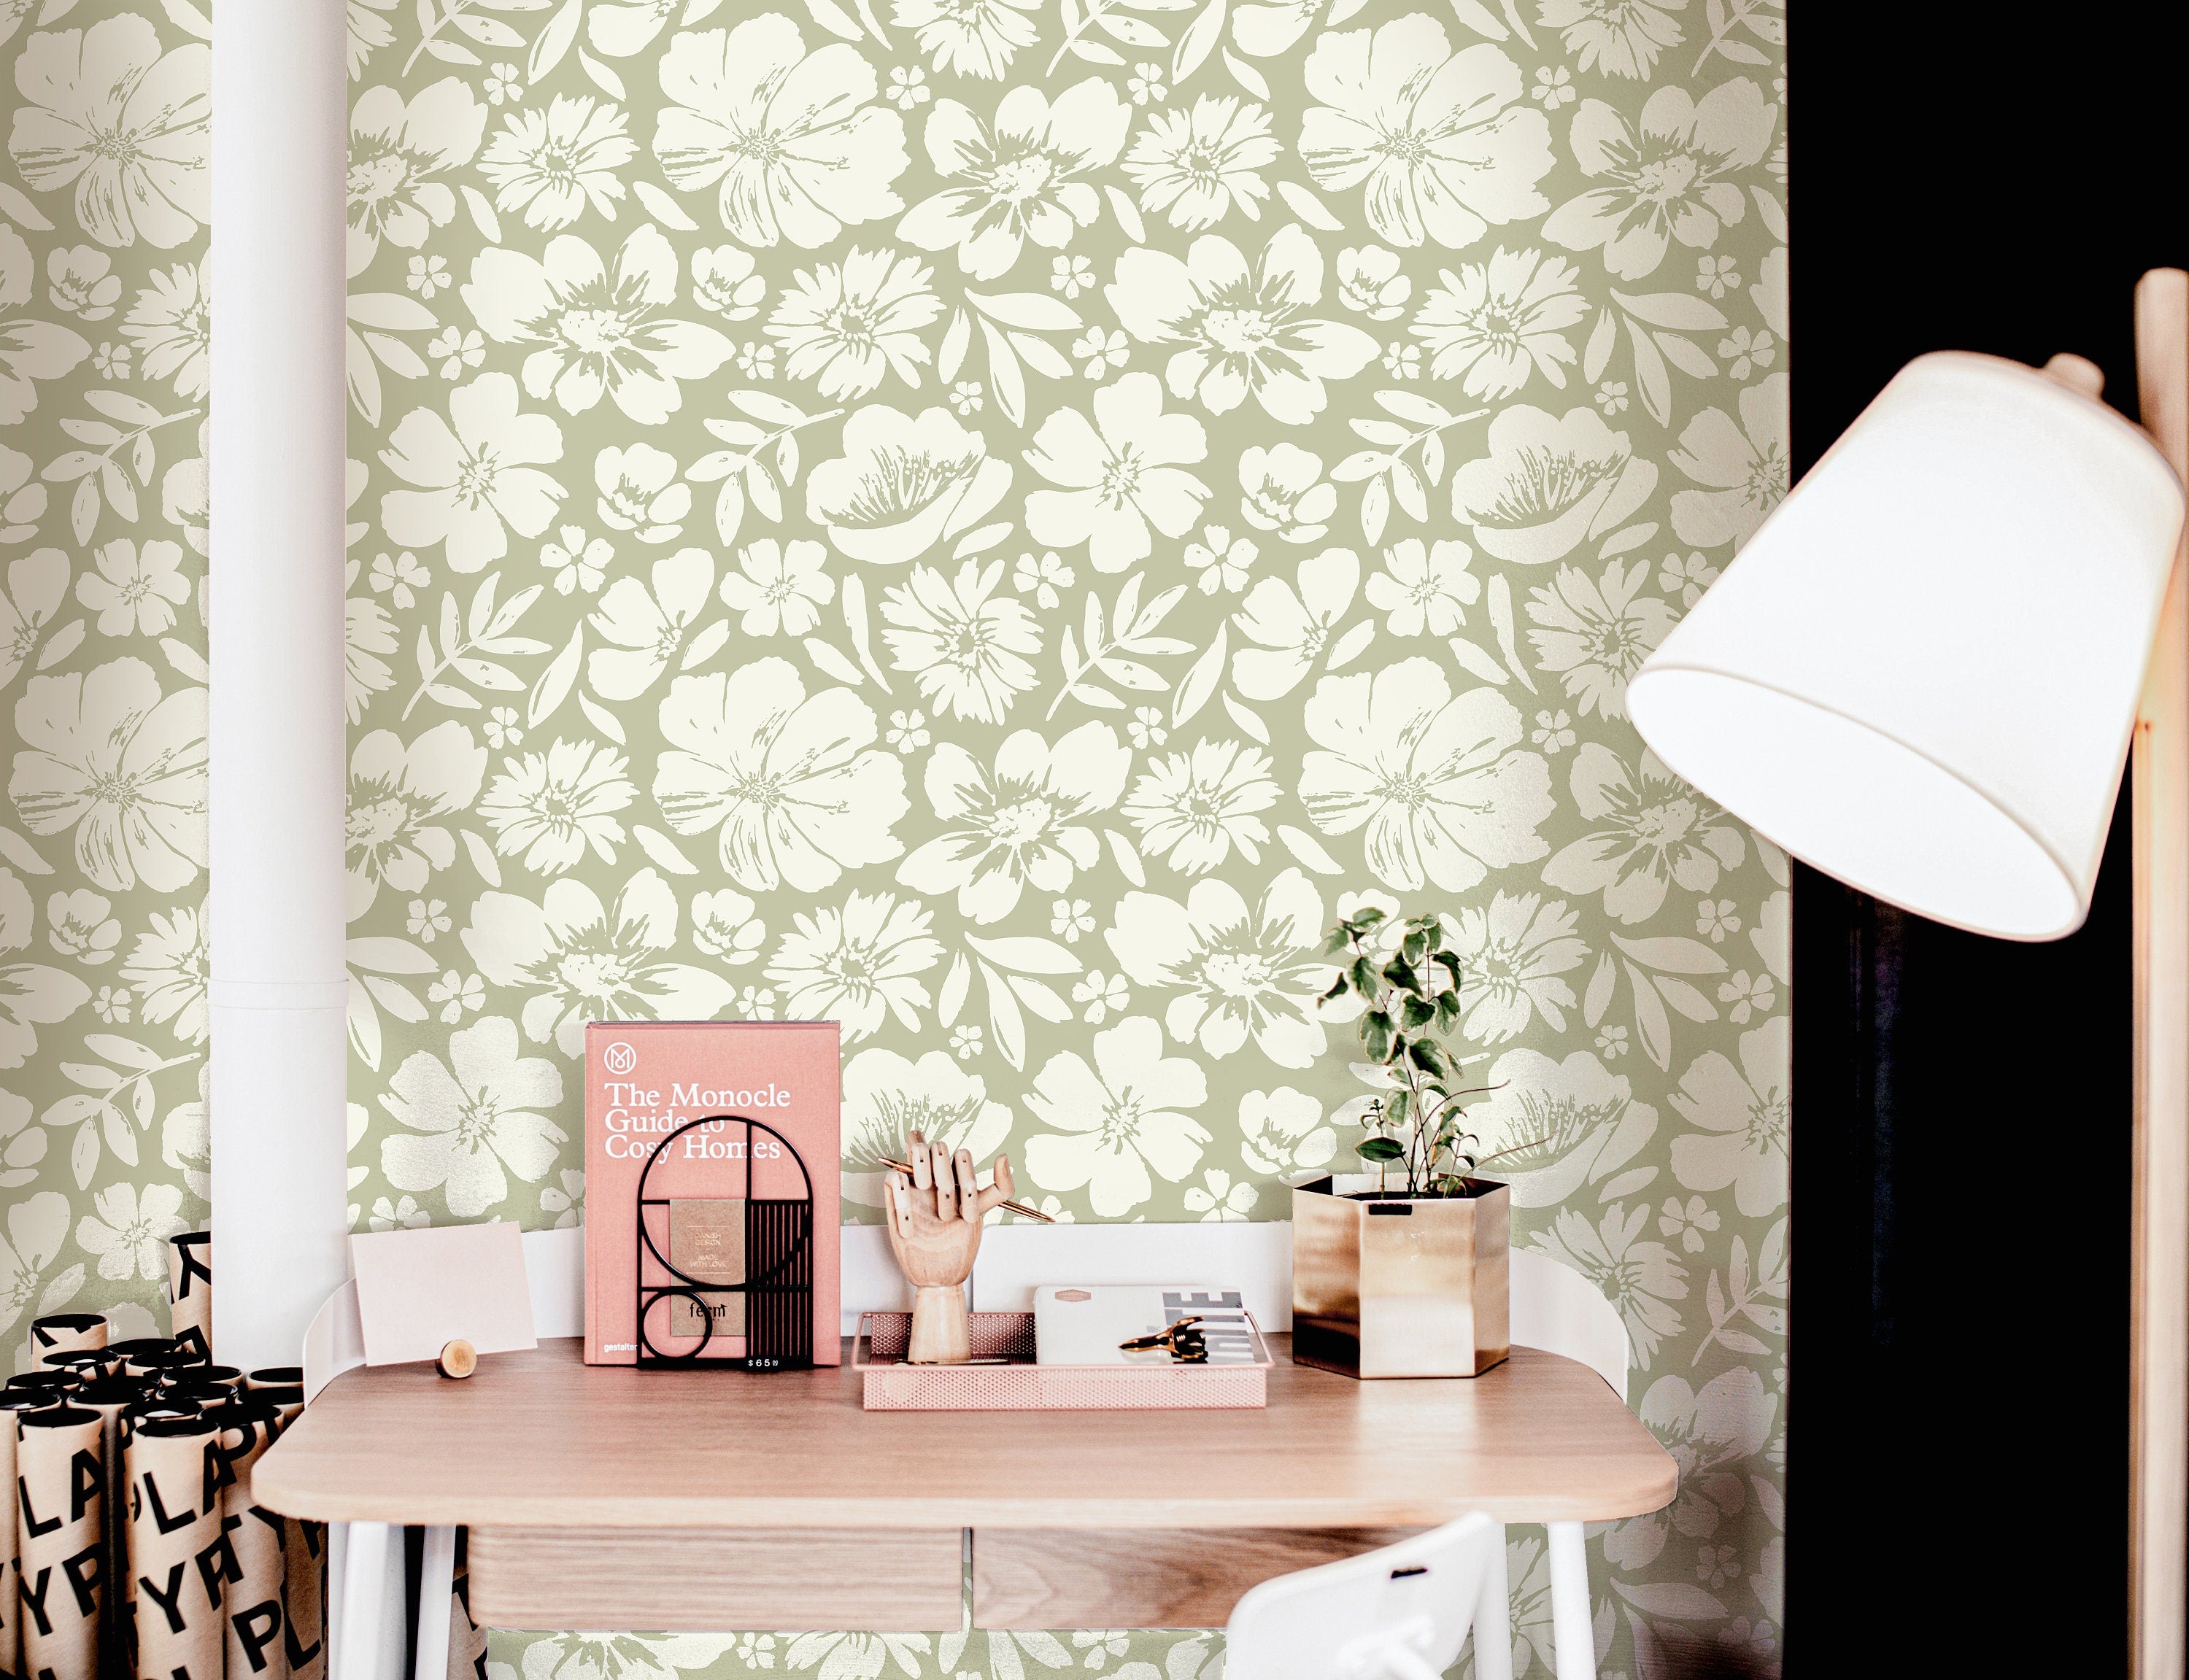 Wallpaper Peel and Stick Wallpaper Muted Olive and White Floral Stamped Removable Wallpaper Wall Decor Home Decor Wall Art Room Decor 3747 - JamesAndColors